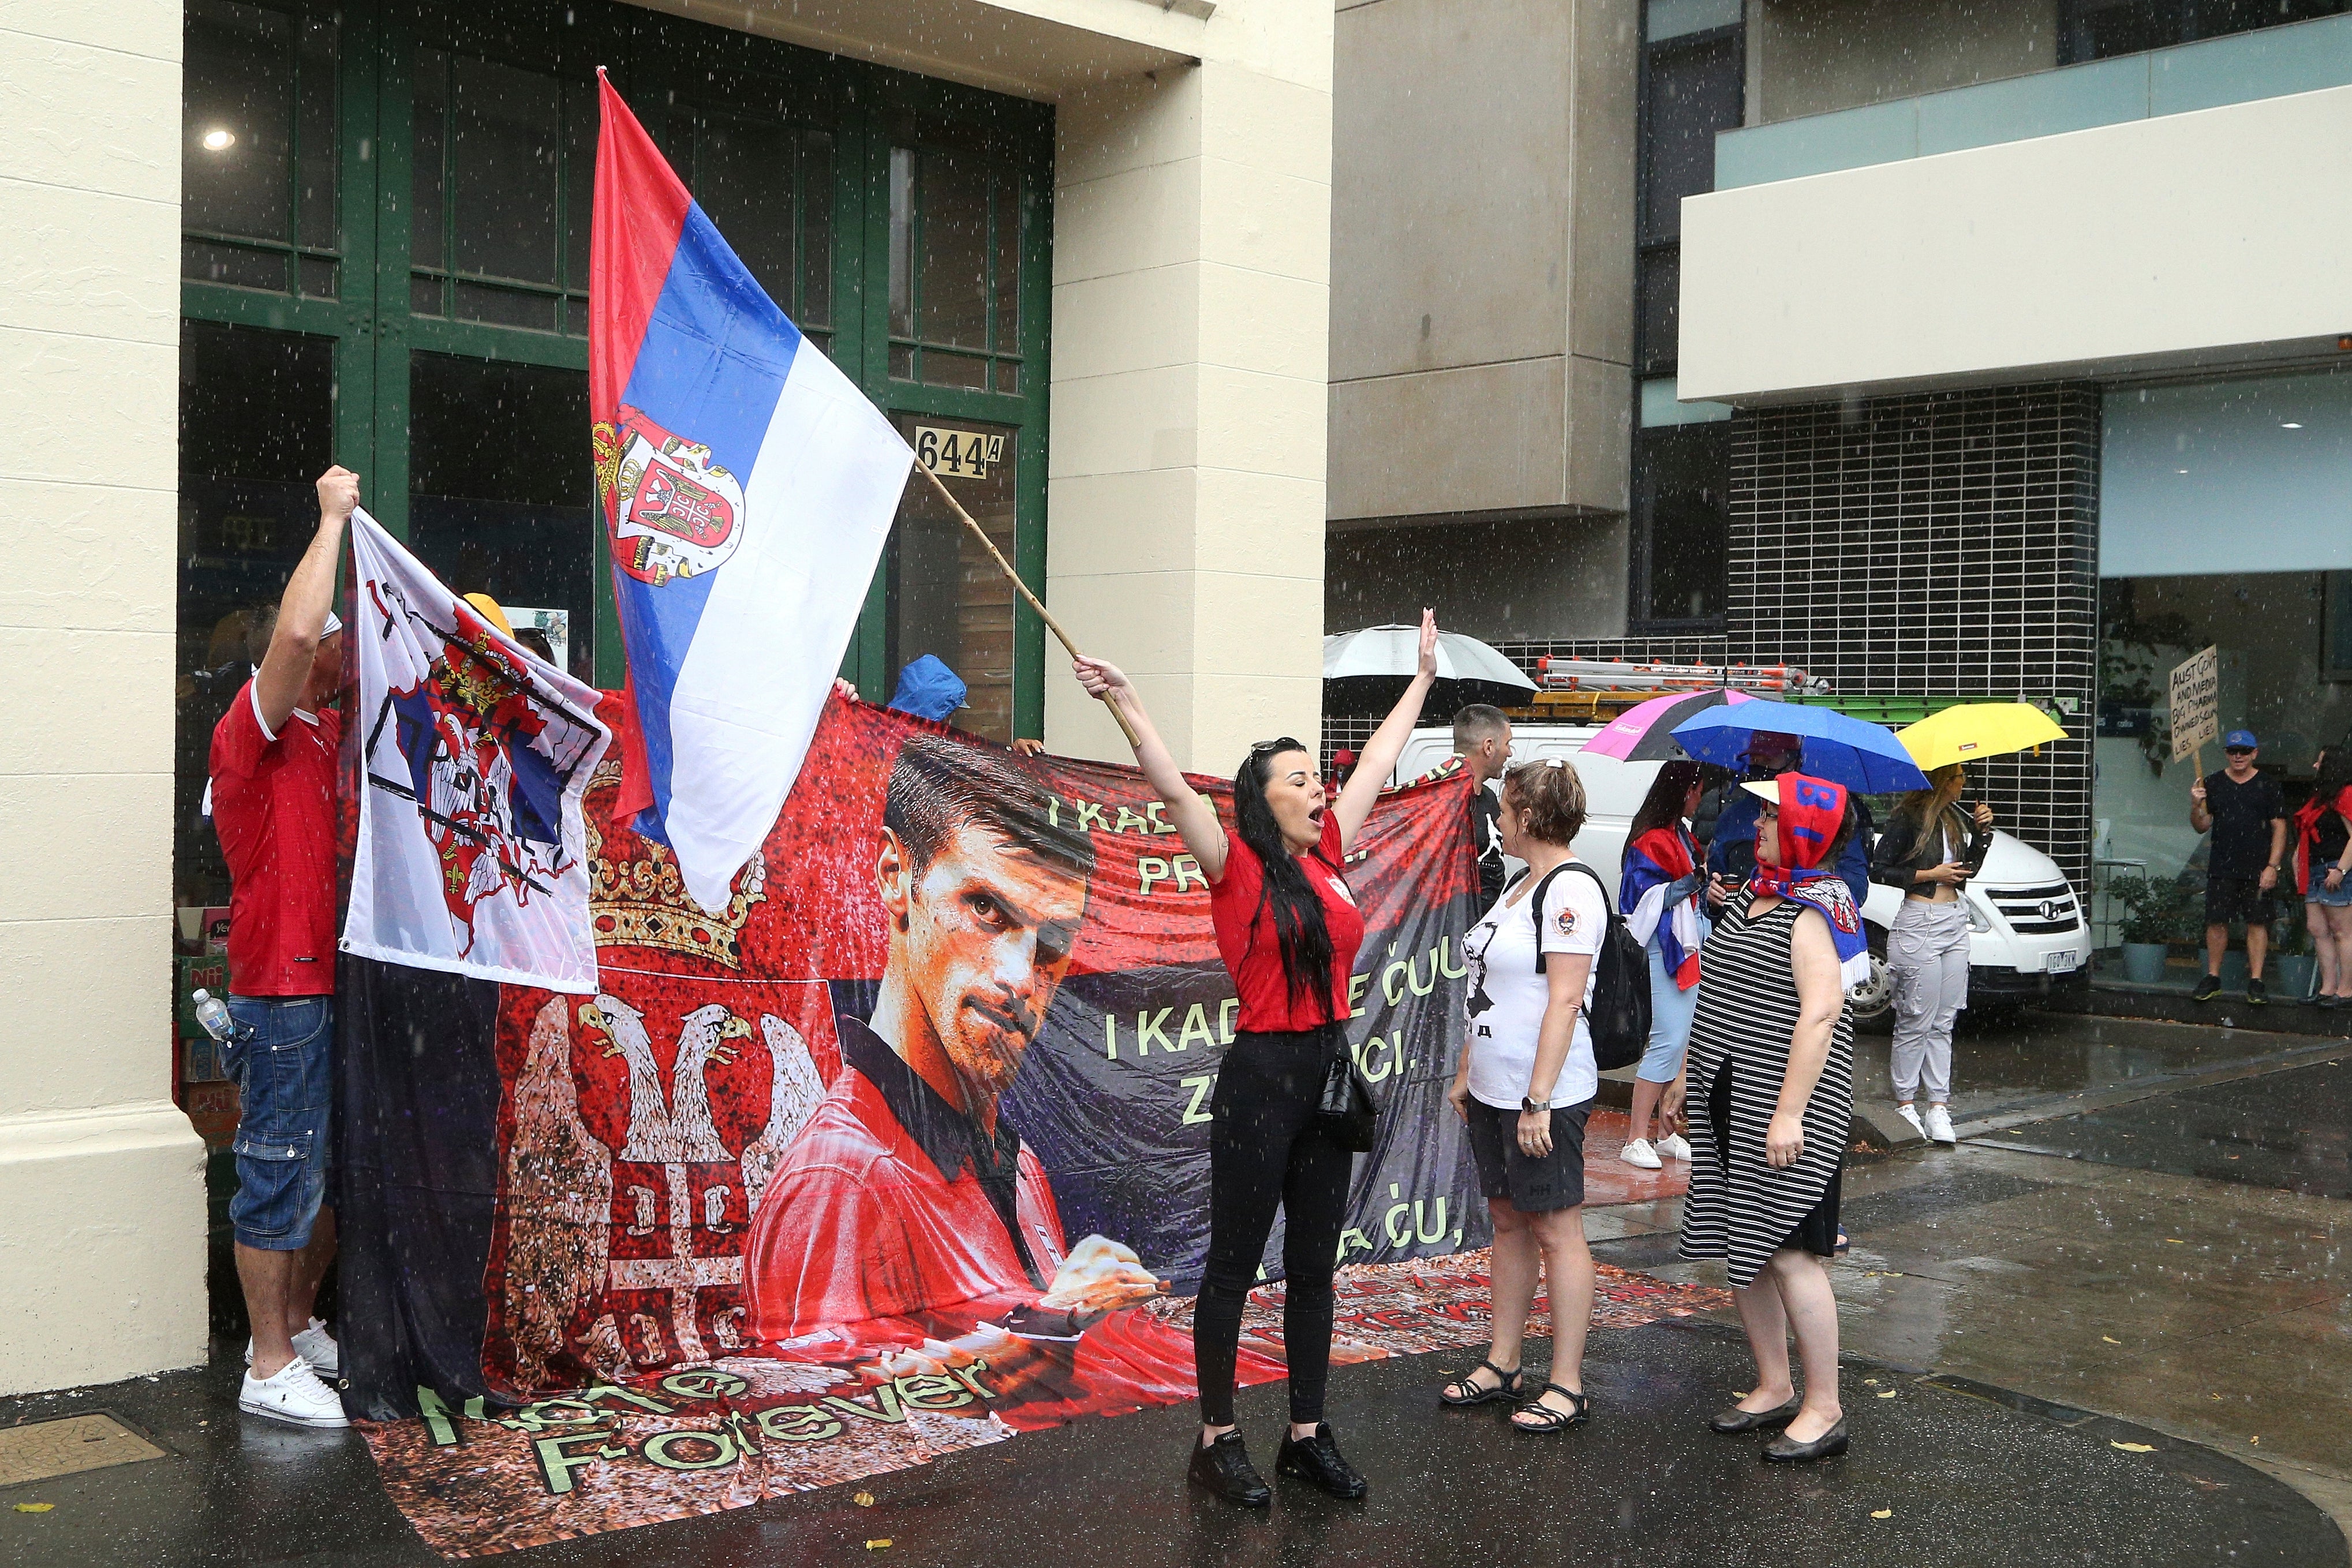 Protestors gather outside an immigration detention hotel where Serbia’s Novak Djokovic is believed to be staying in Melbourne